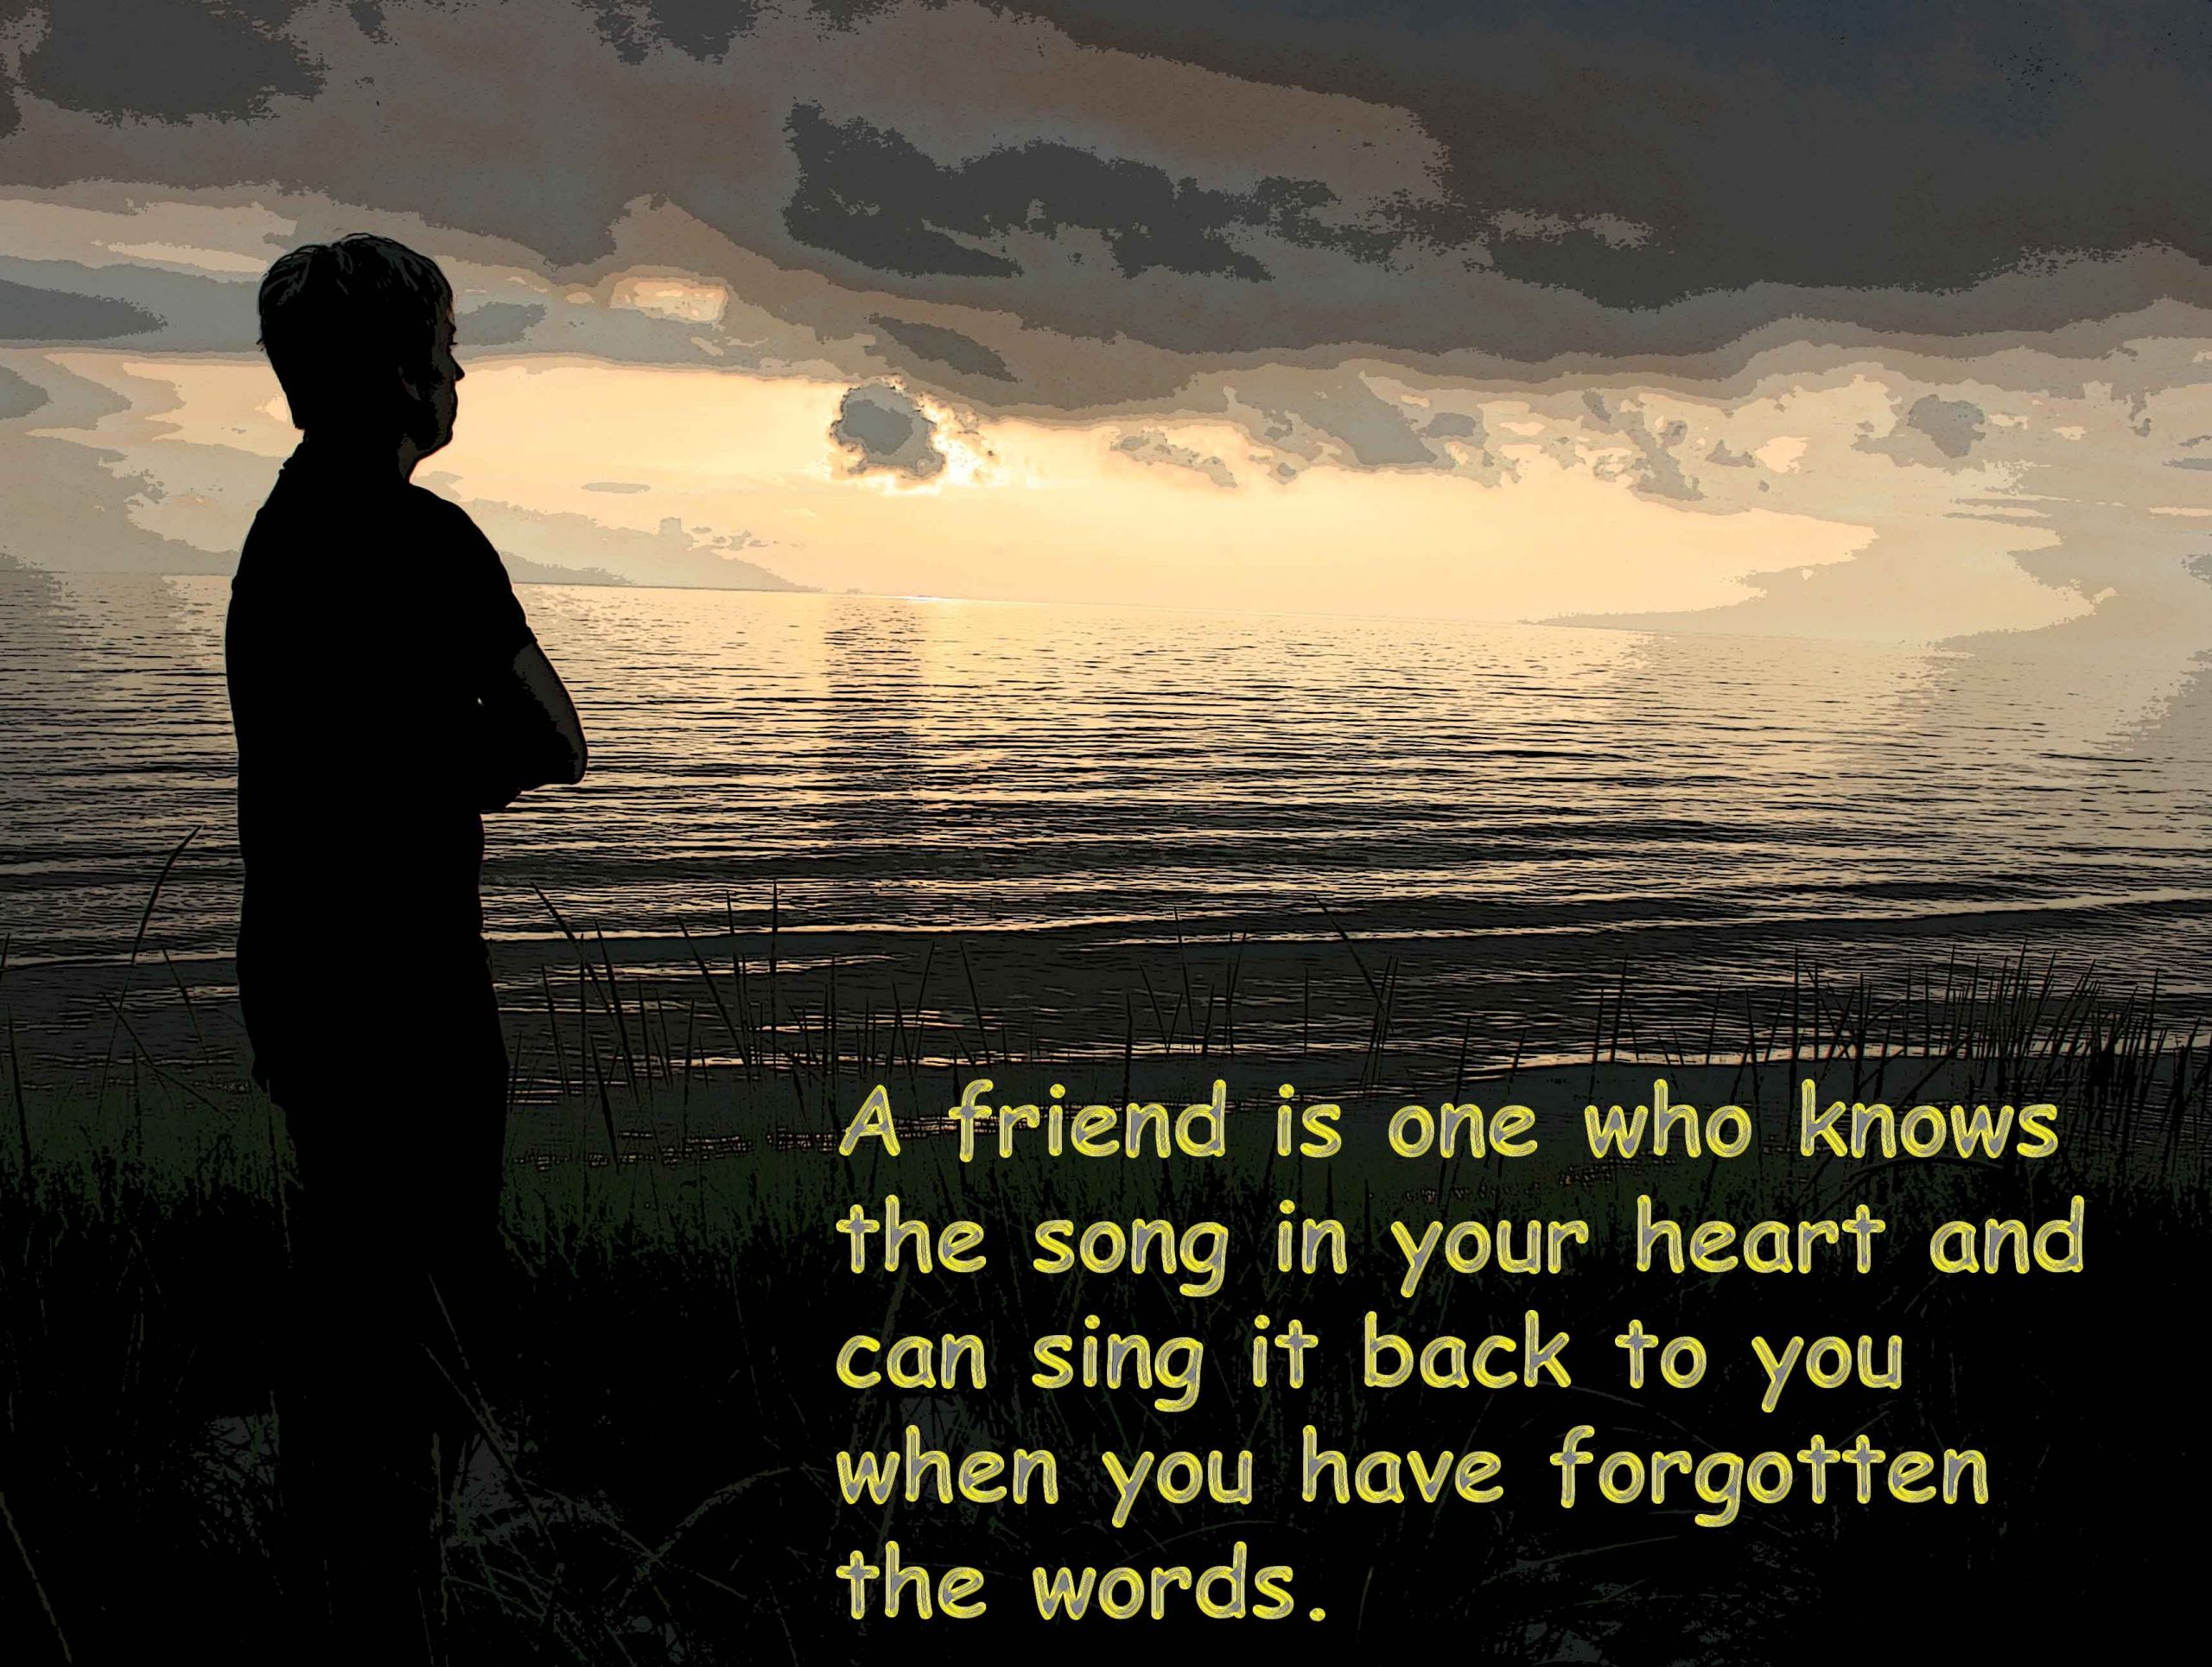 Inspirational Quotes About Friendship
 23 Inspirational Friendship Quotes For Your Friend